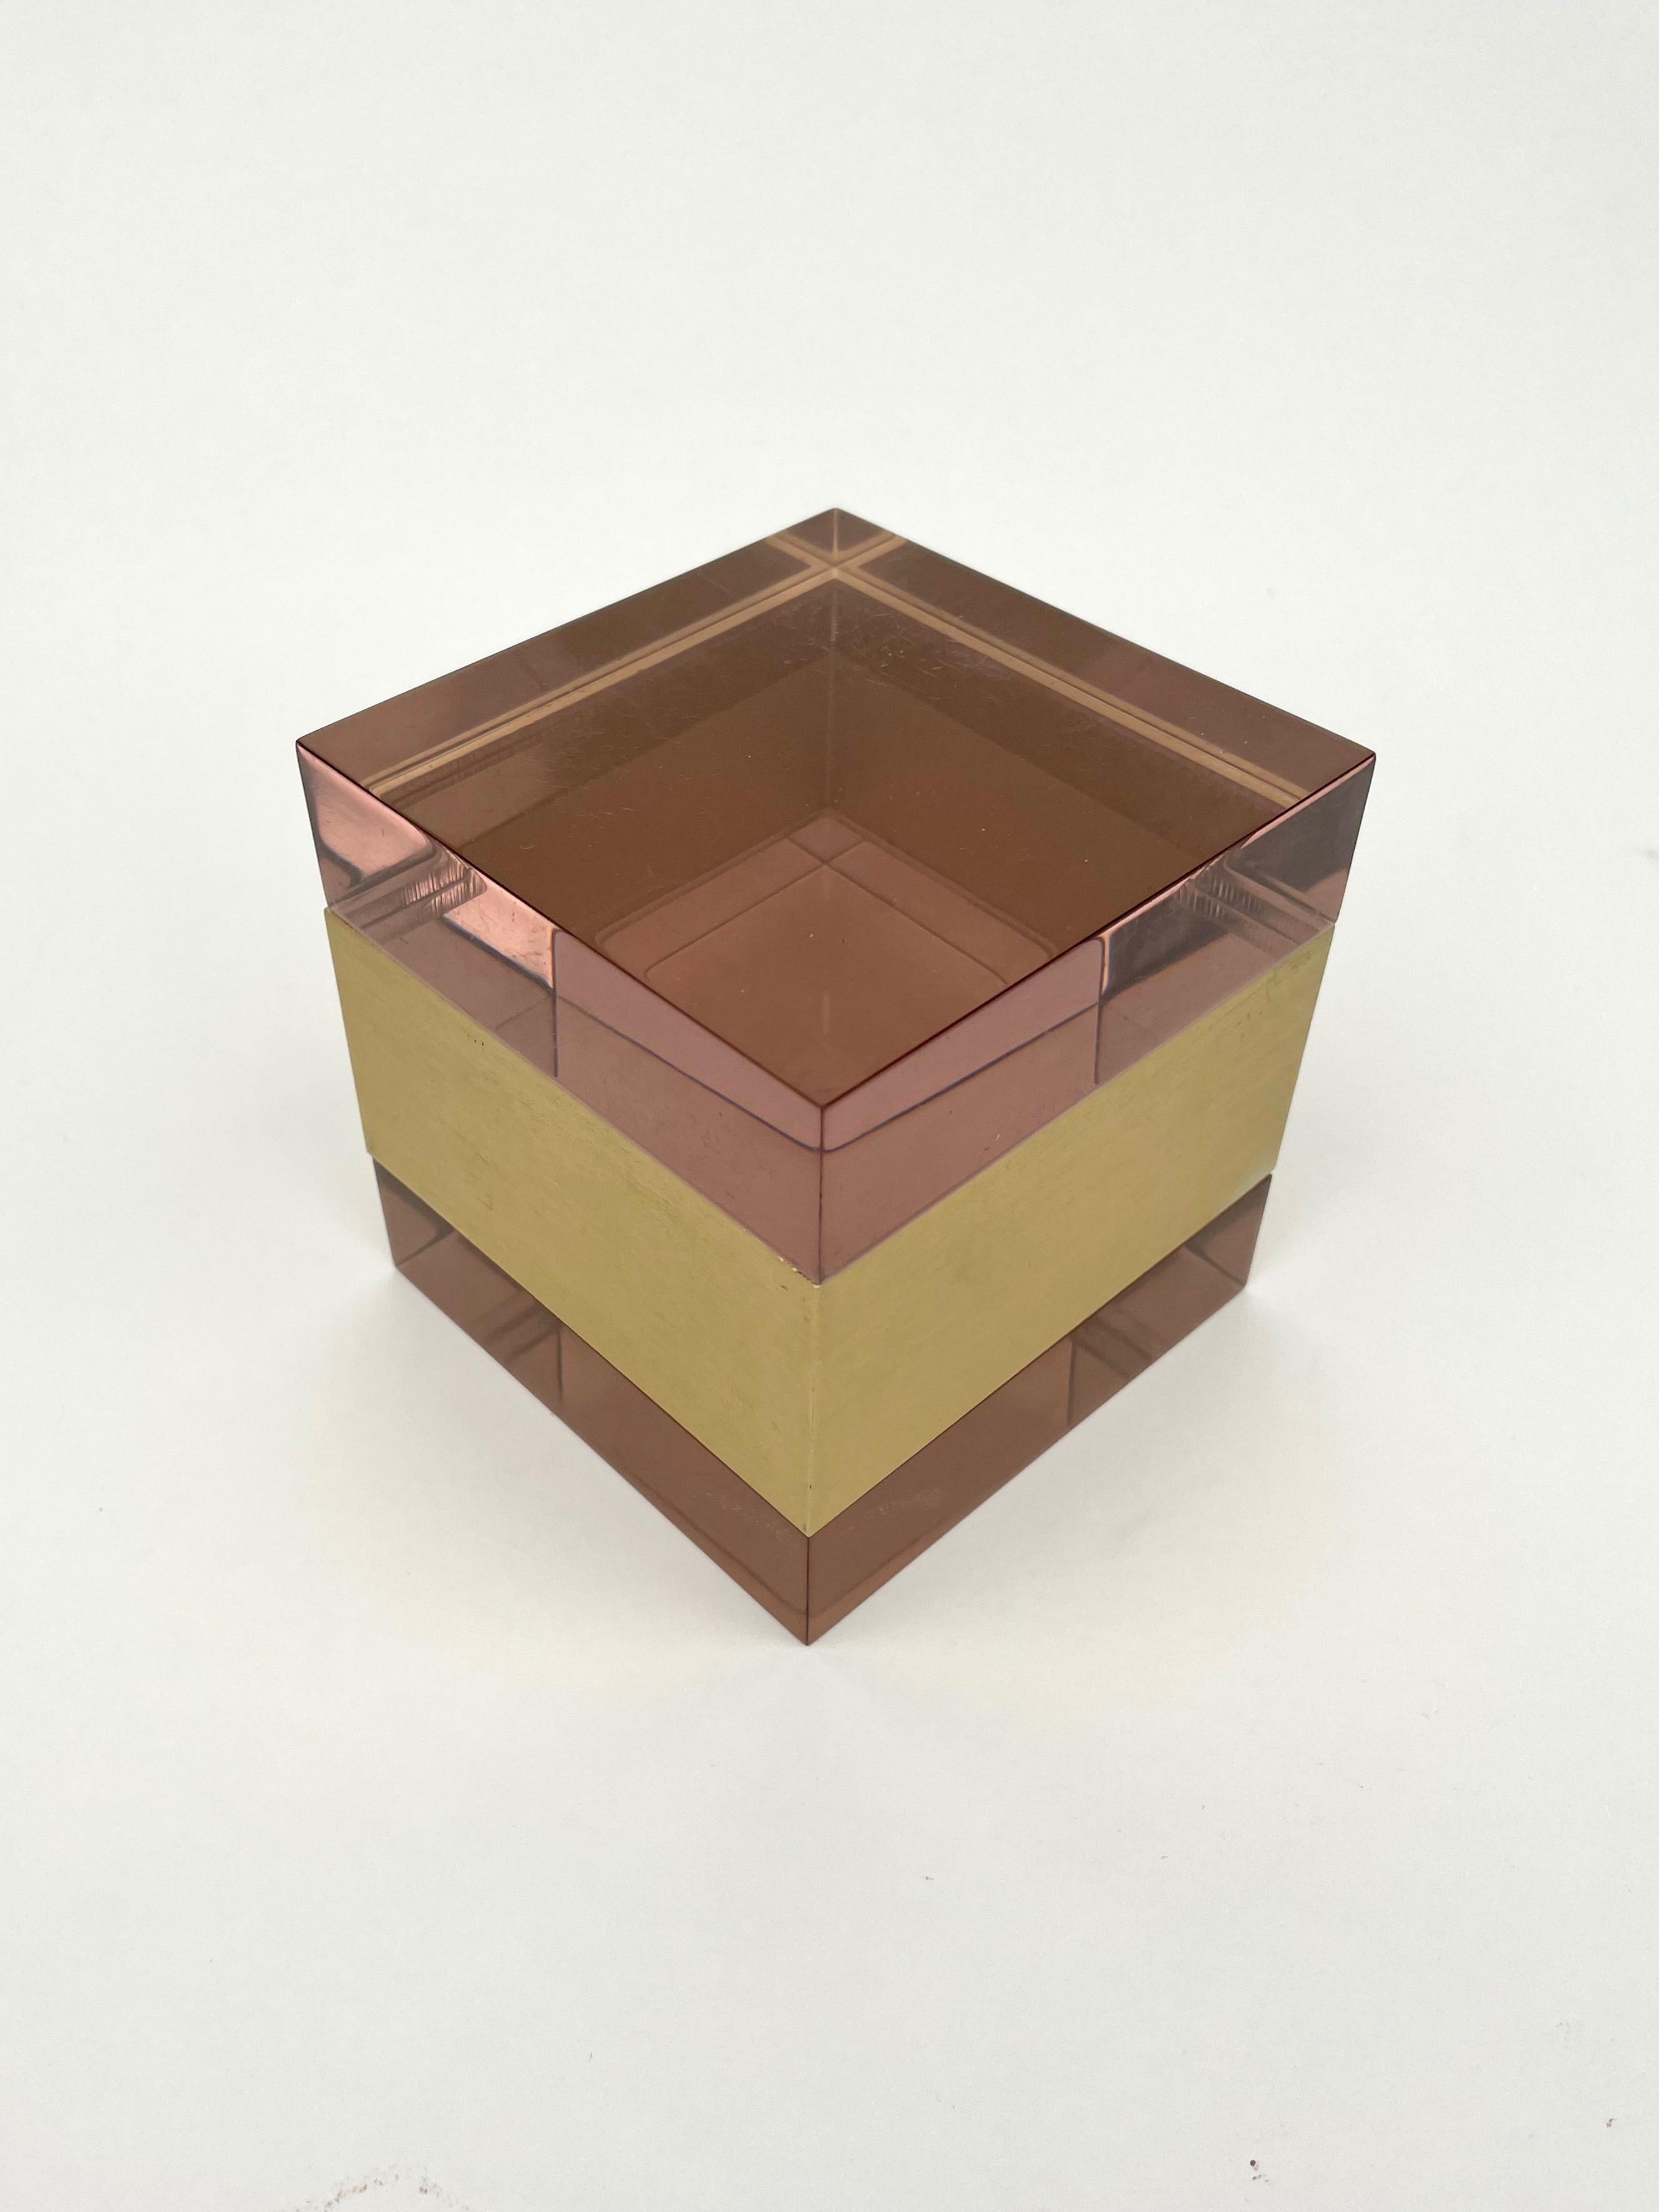 This auction is for a purple cube Lucite box with gold color metal in the centre by Italian Designer Alessandro Albrizzi. Overall the piece is beautiful with a wonderful color scheme and an elegance that is hard to come by these days.